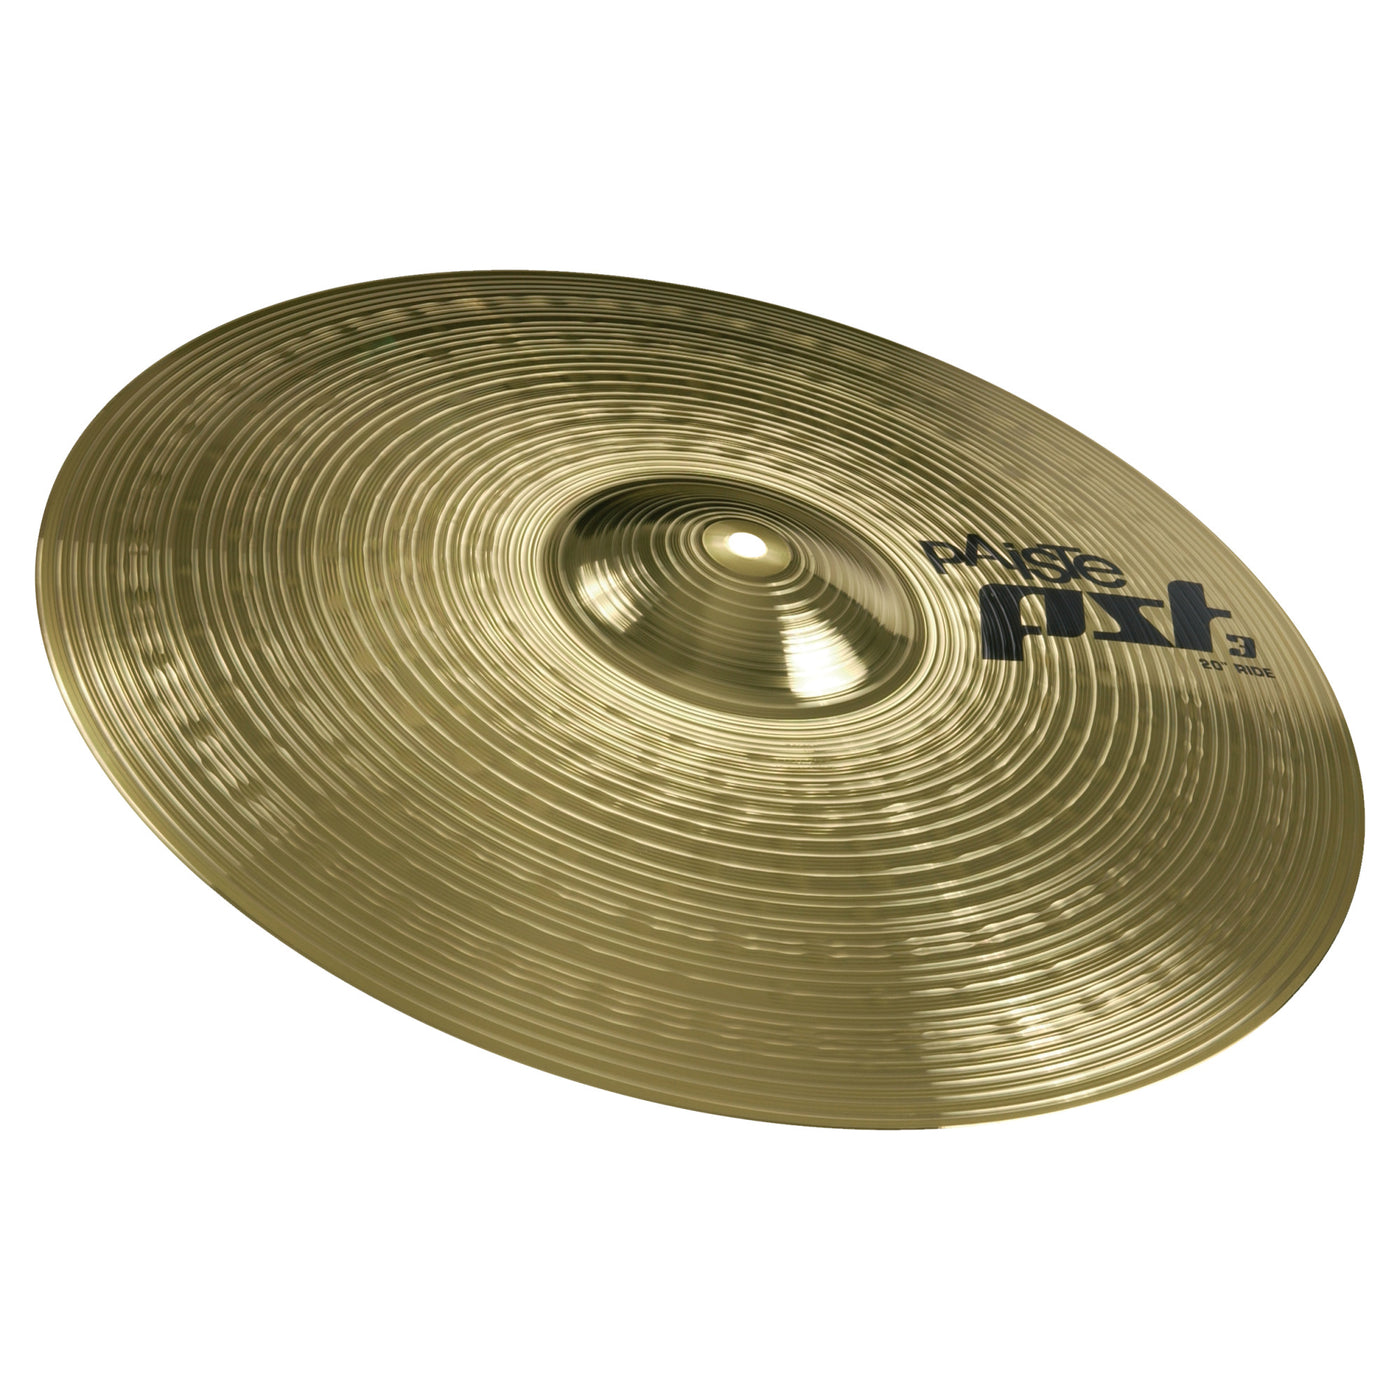 Paiste Ride Cymbal, PST 3 Series, Percussion Instrument for Drums, 20"